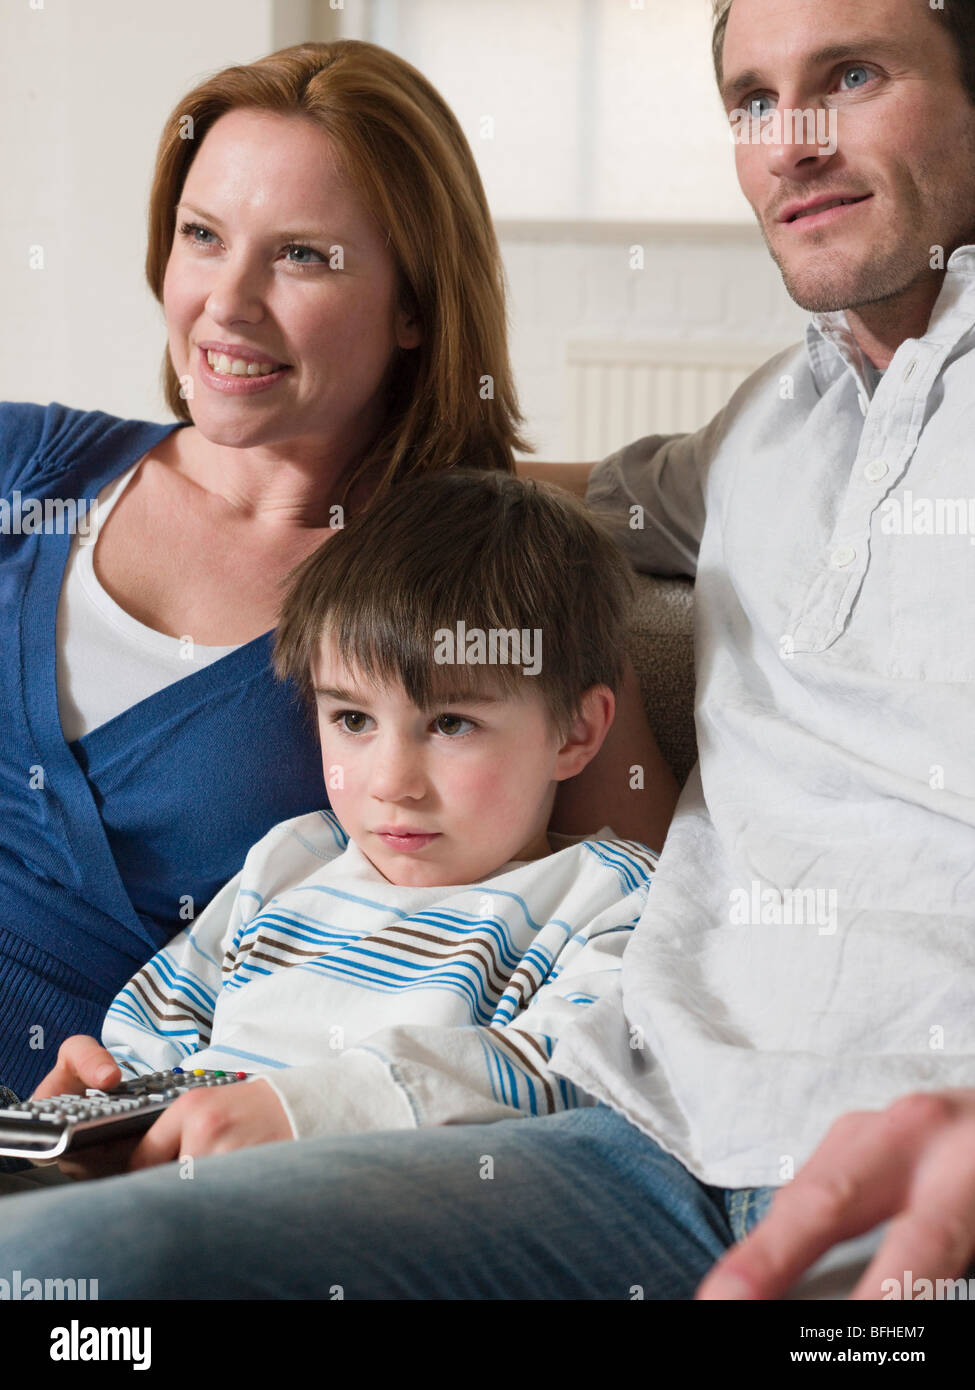 Boy Between Parents Watching Television Stock Photo